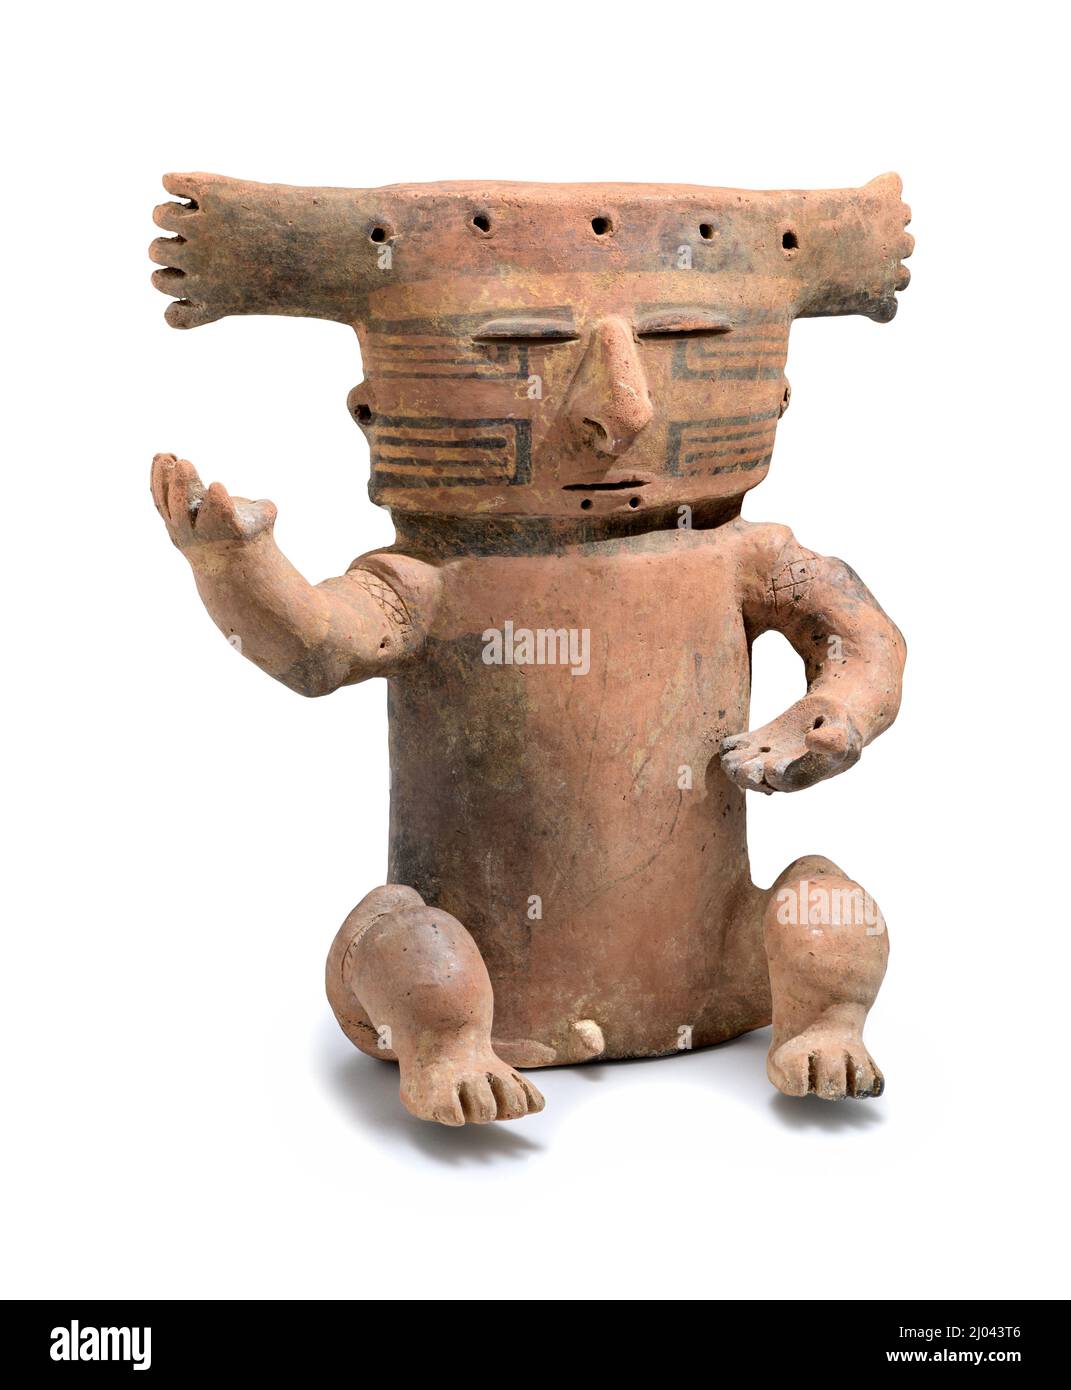 Seated Man with Headdress. Colombia, Middle Cauca Valley (Late Period), Middle Cauca, 700–1600 CE. Ceramics. Resist-painted ceramic Stock Photo